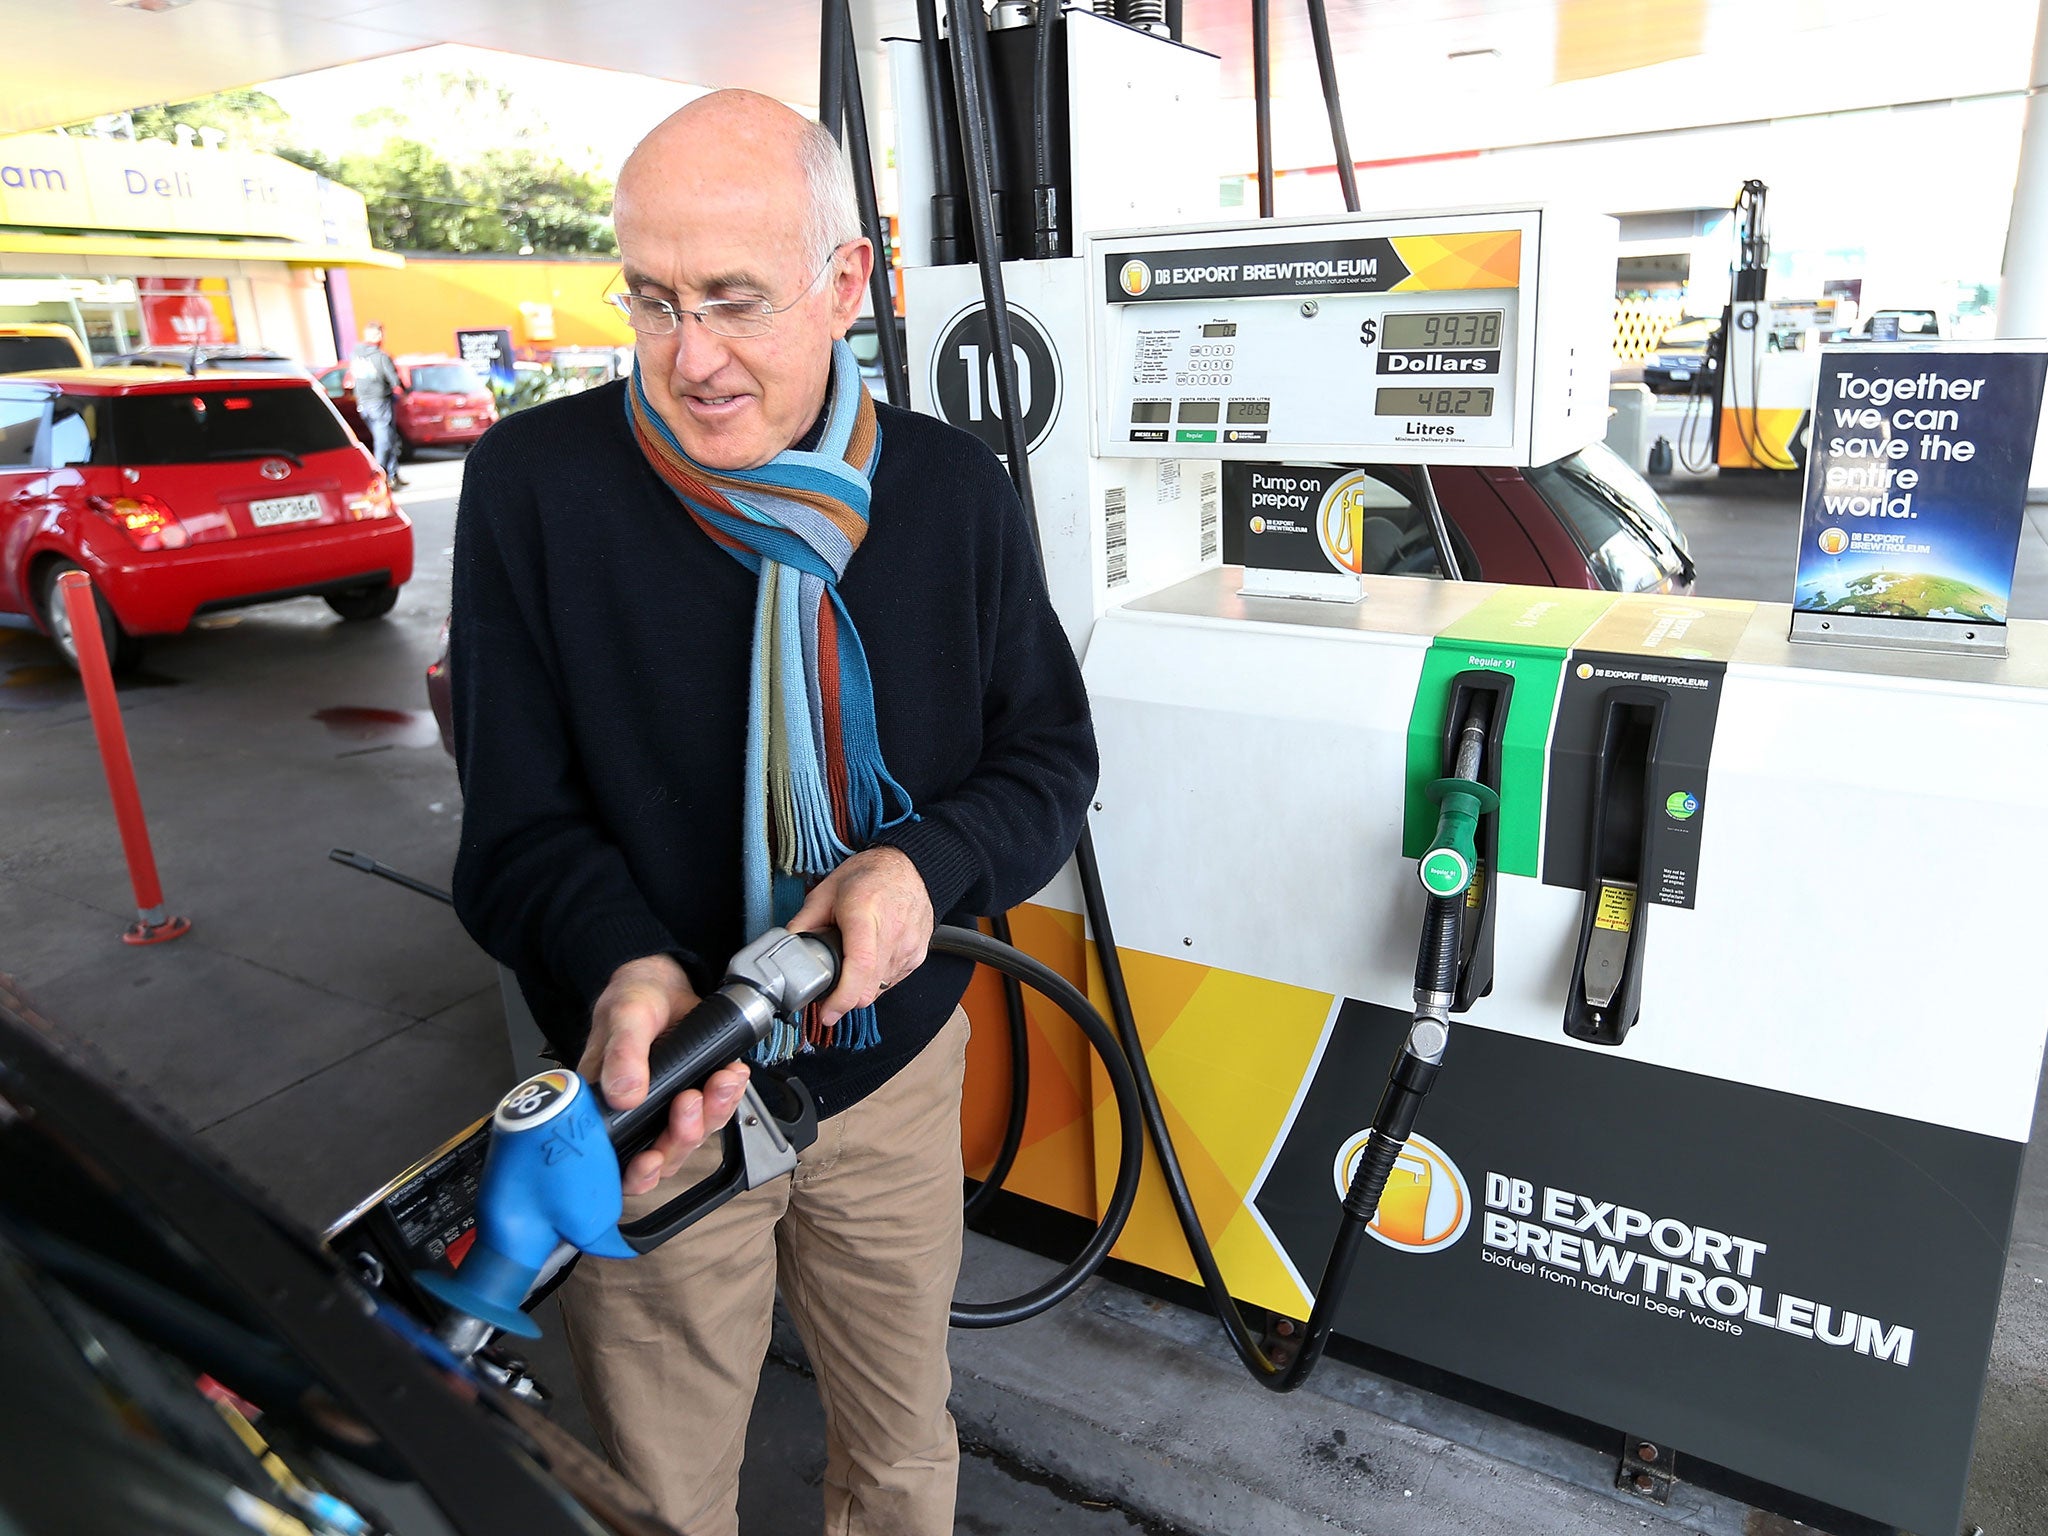 A driver fills up his car with Brewtroluem biofuel in New Zealand